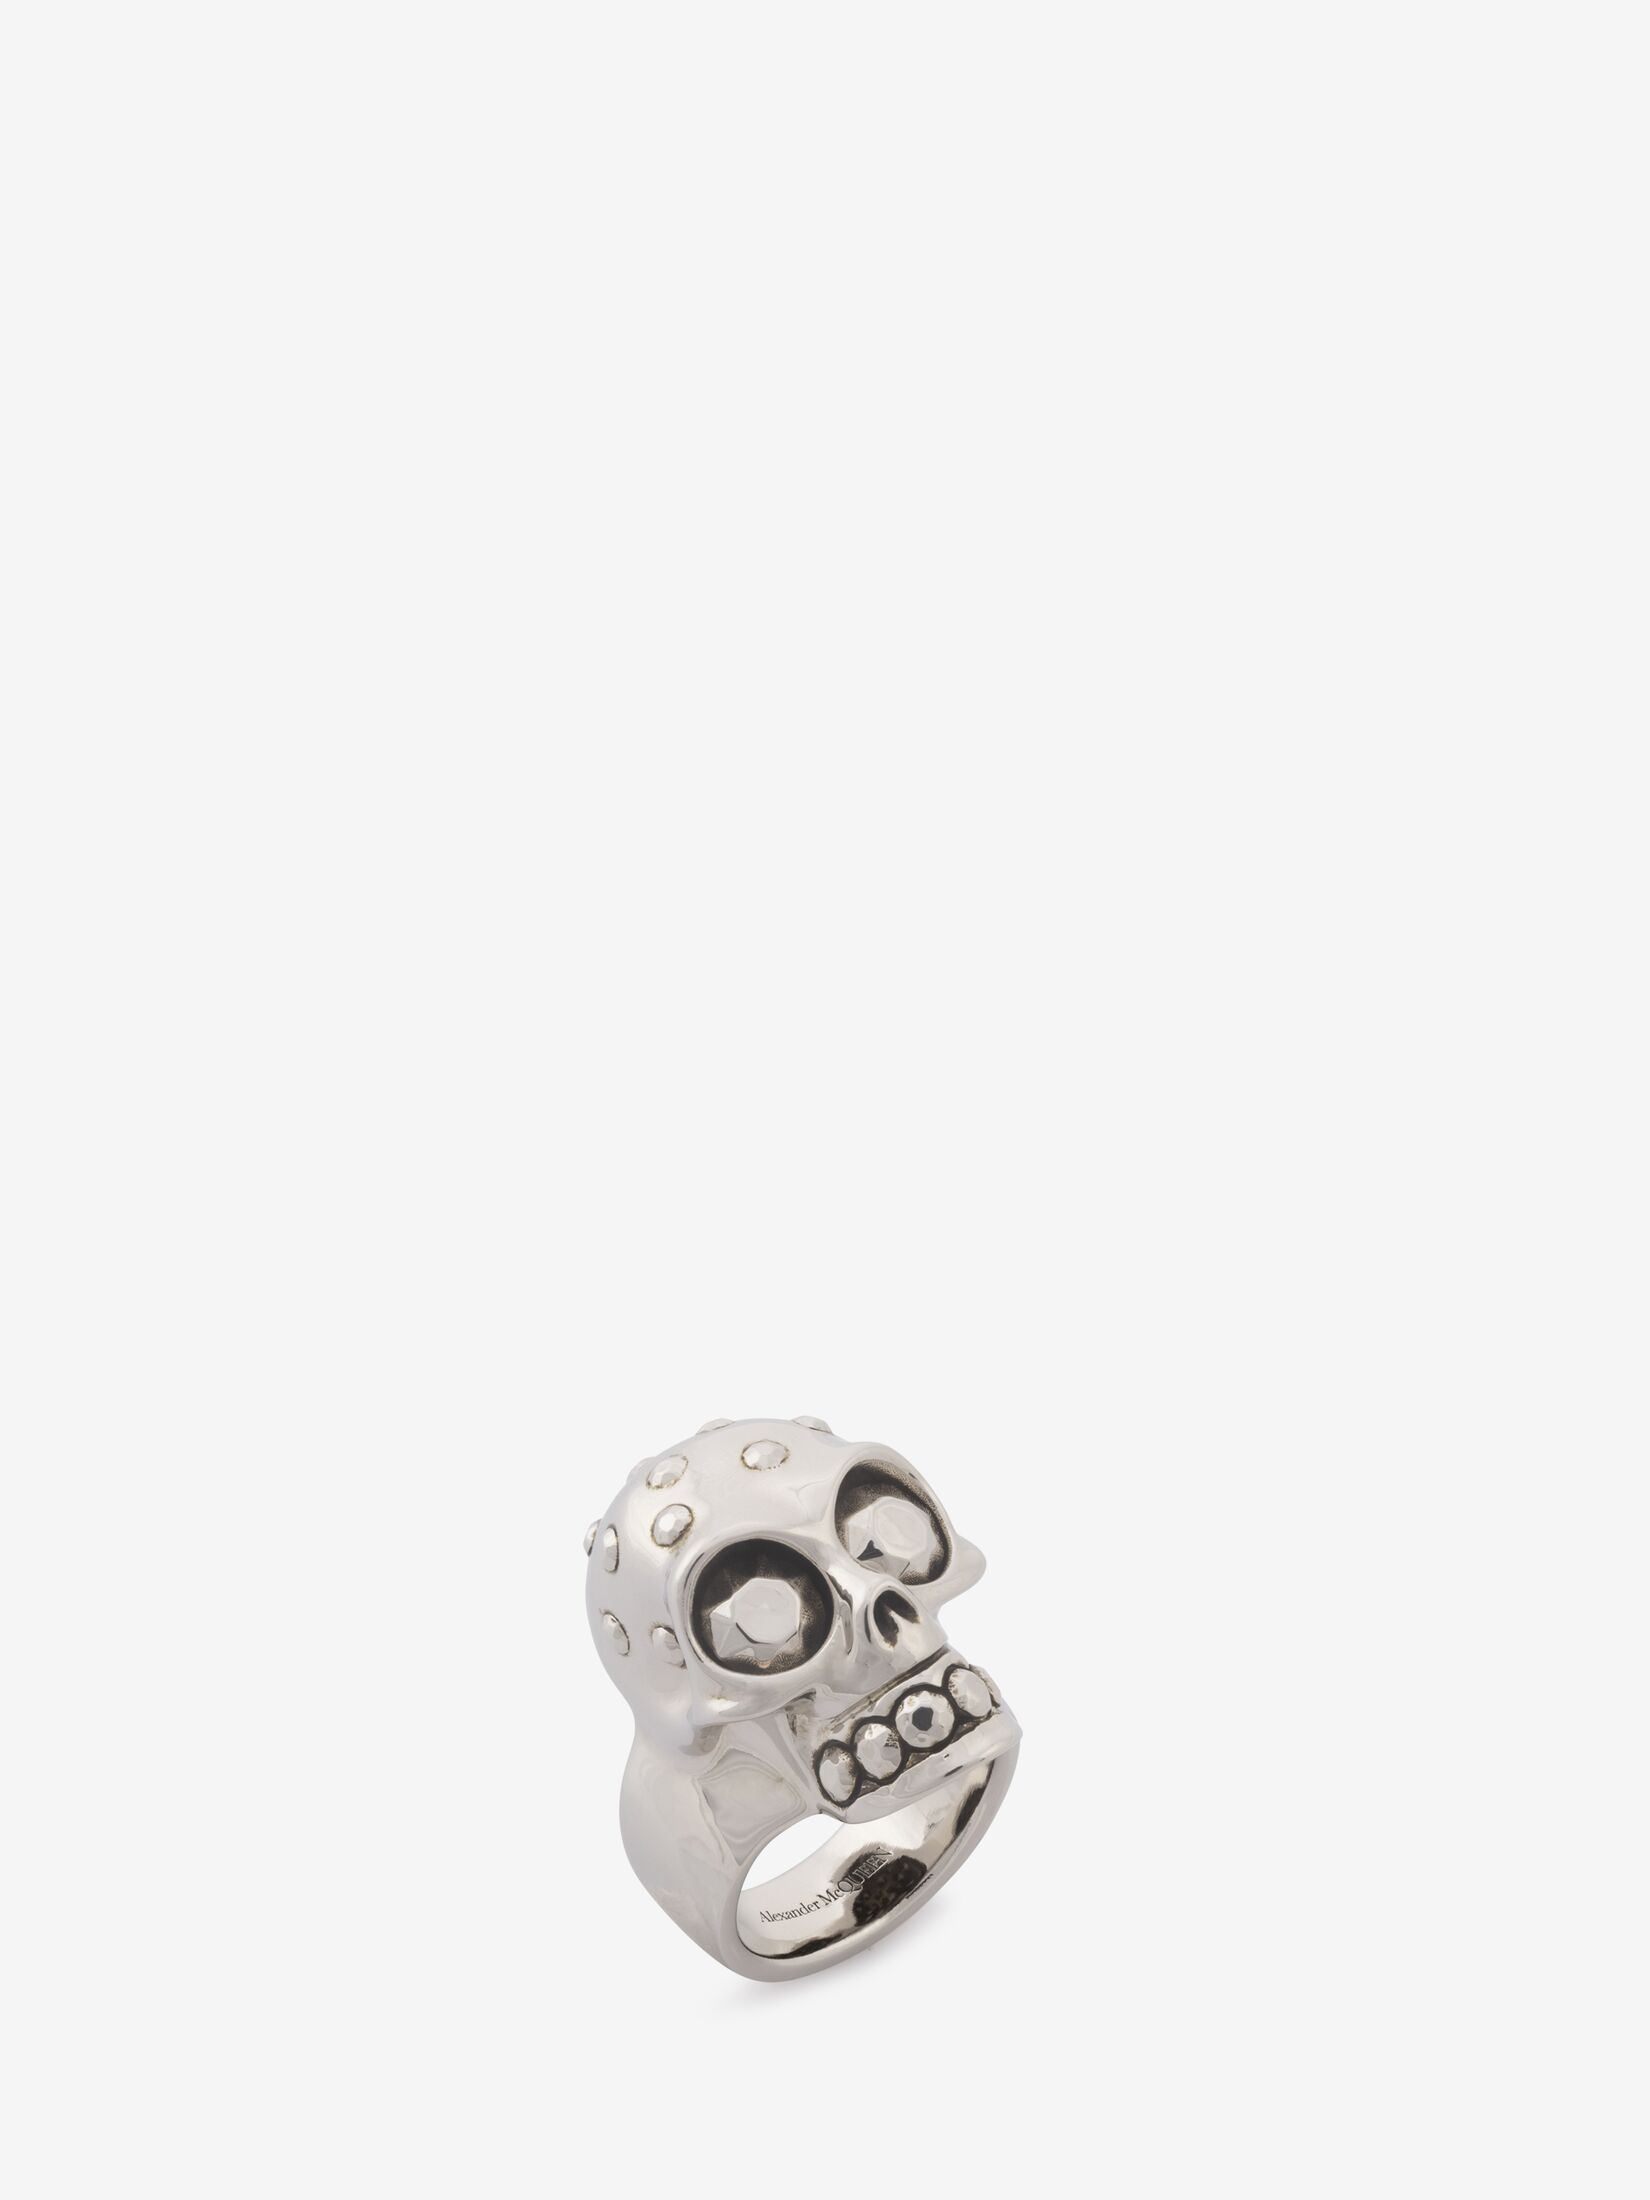 The Knuckle Skull Ring